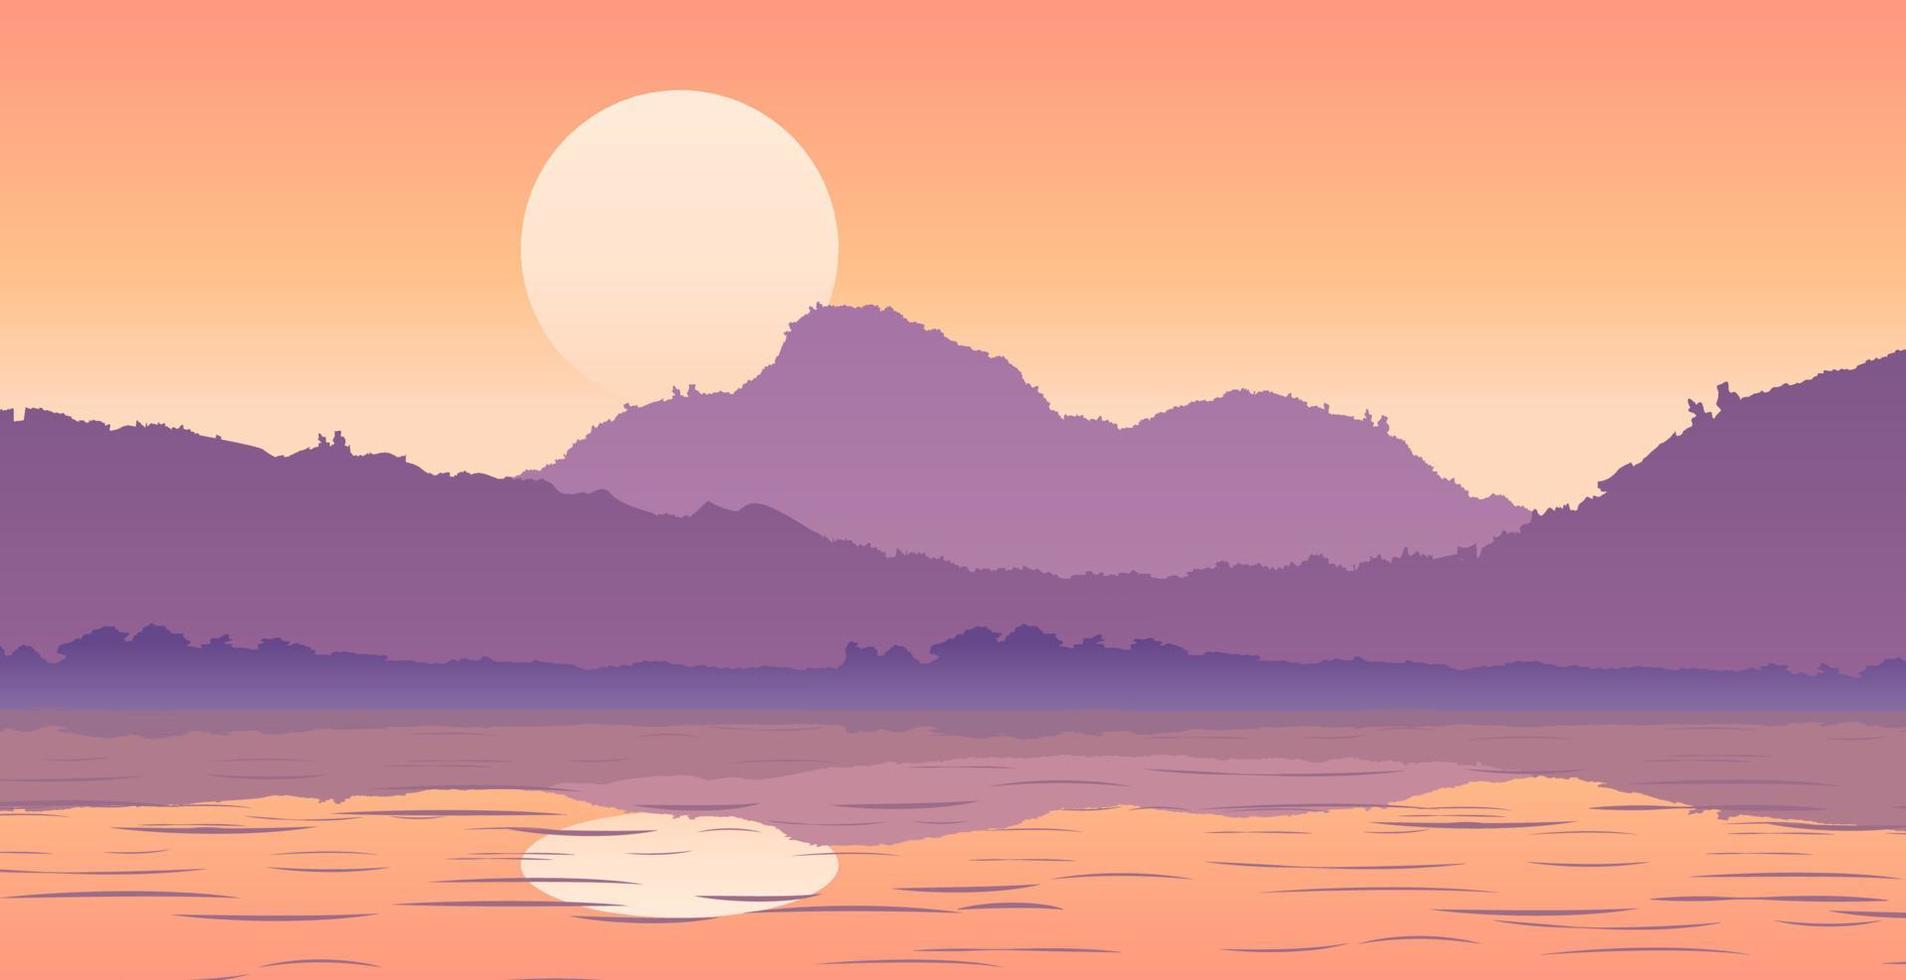 Silhouette design of background with mountain and river vector